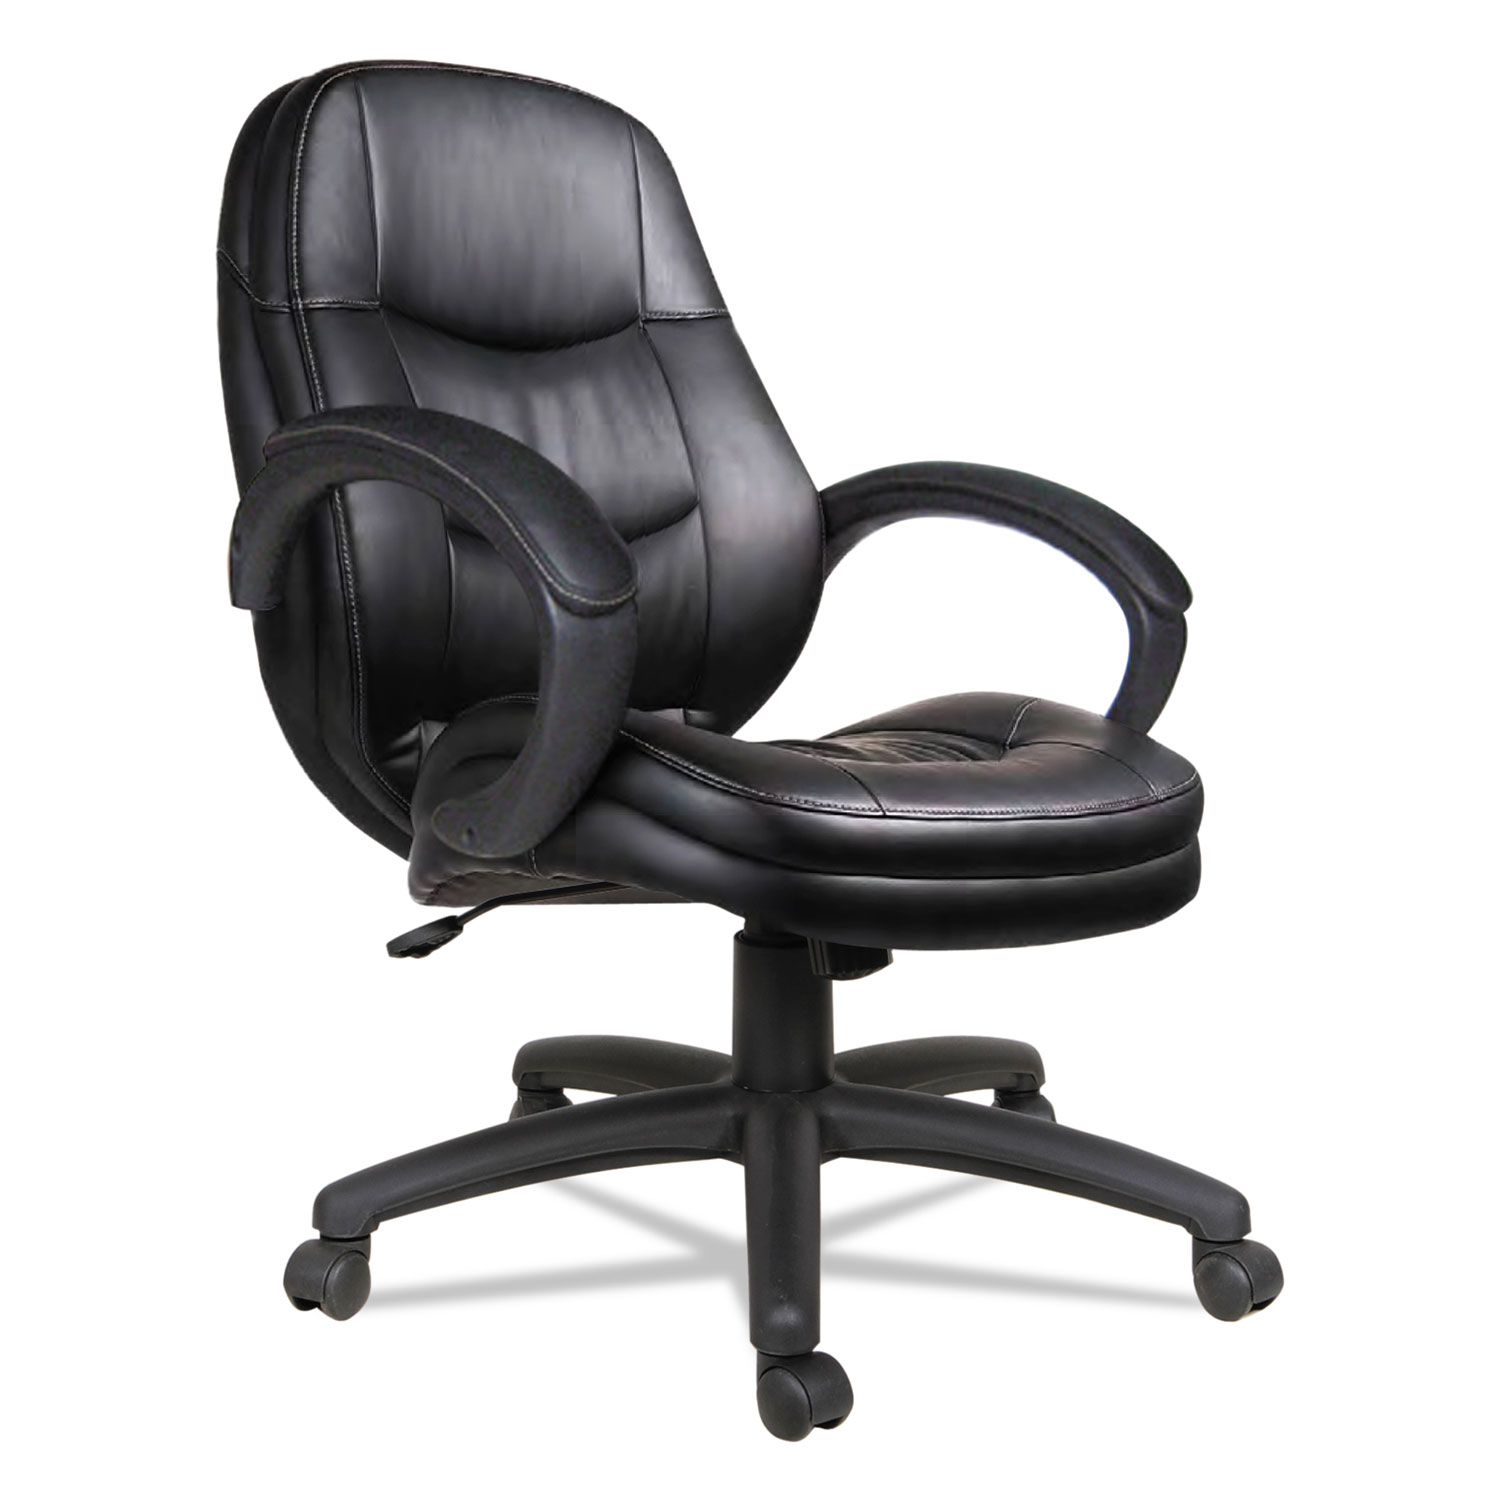 Alera PF Series Mid-Back Leather Office Chair, Black Leather, Black Frame